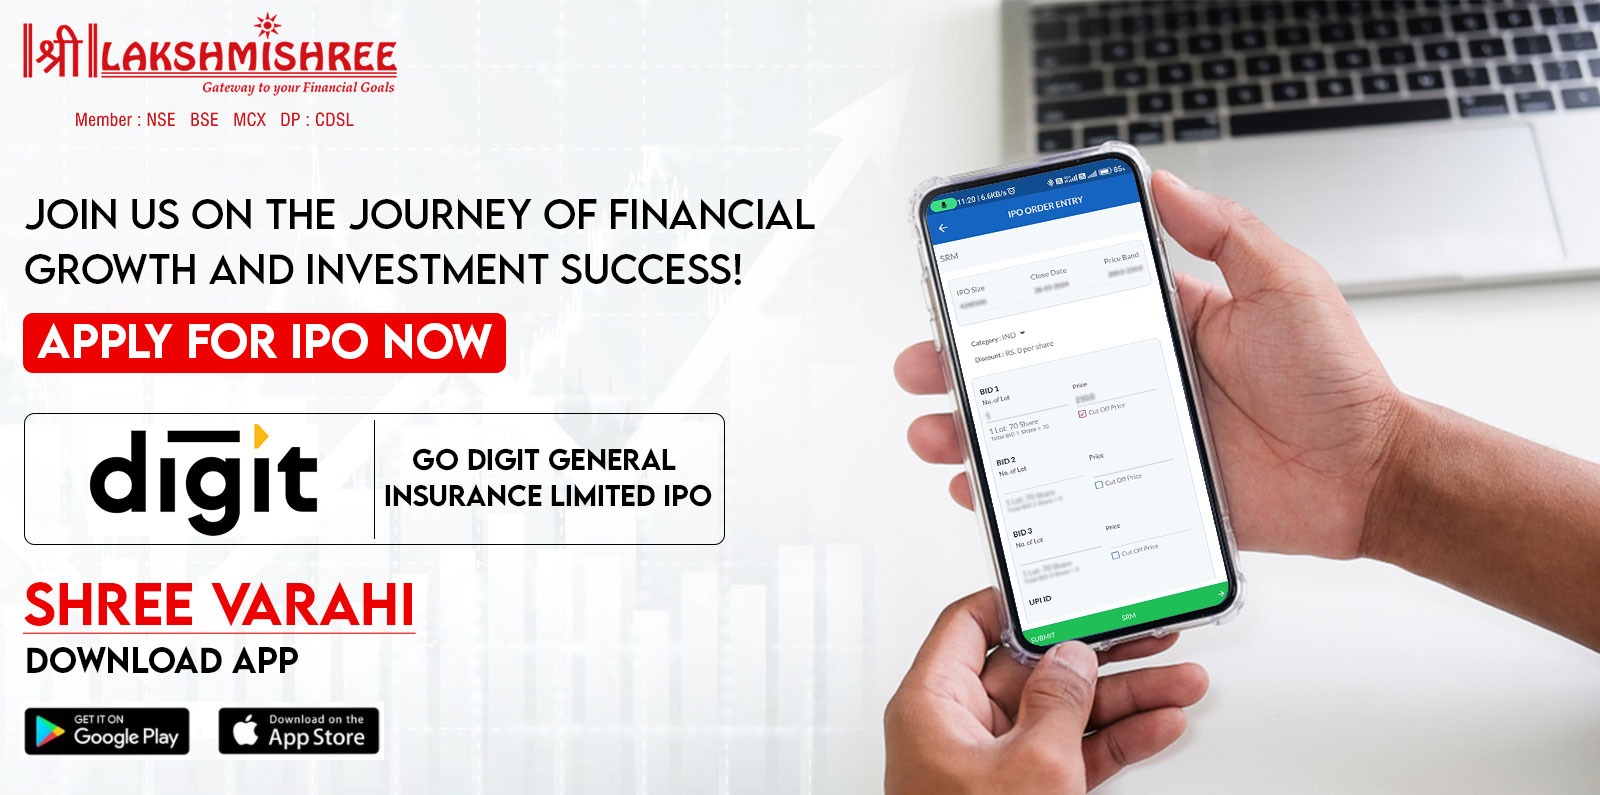 Go Digit IPO Details - Complete Overview of Go Digit General Insurance Limited IPO